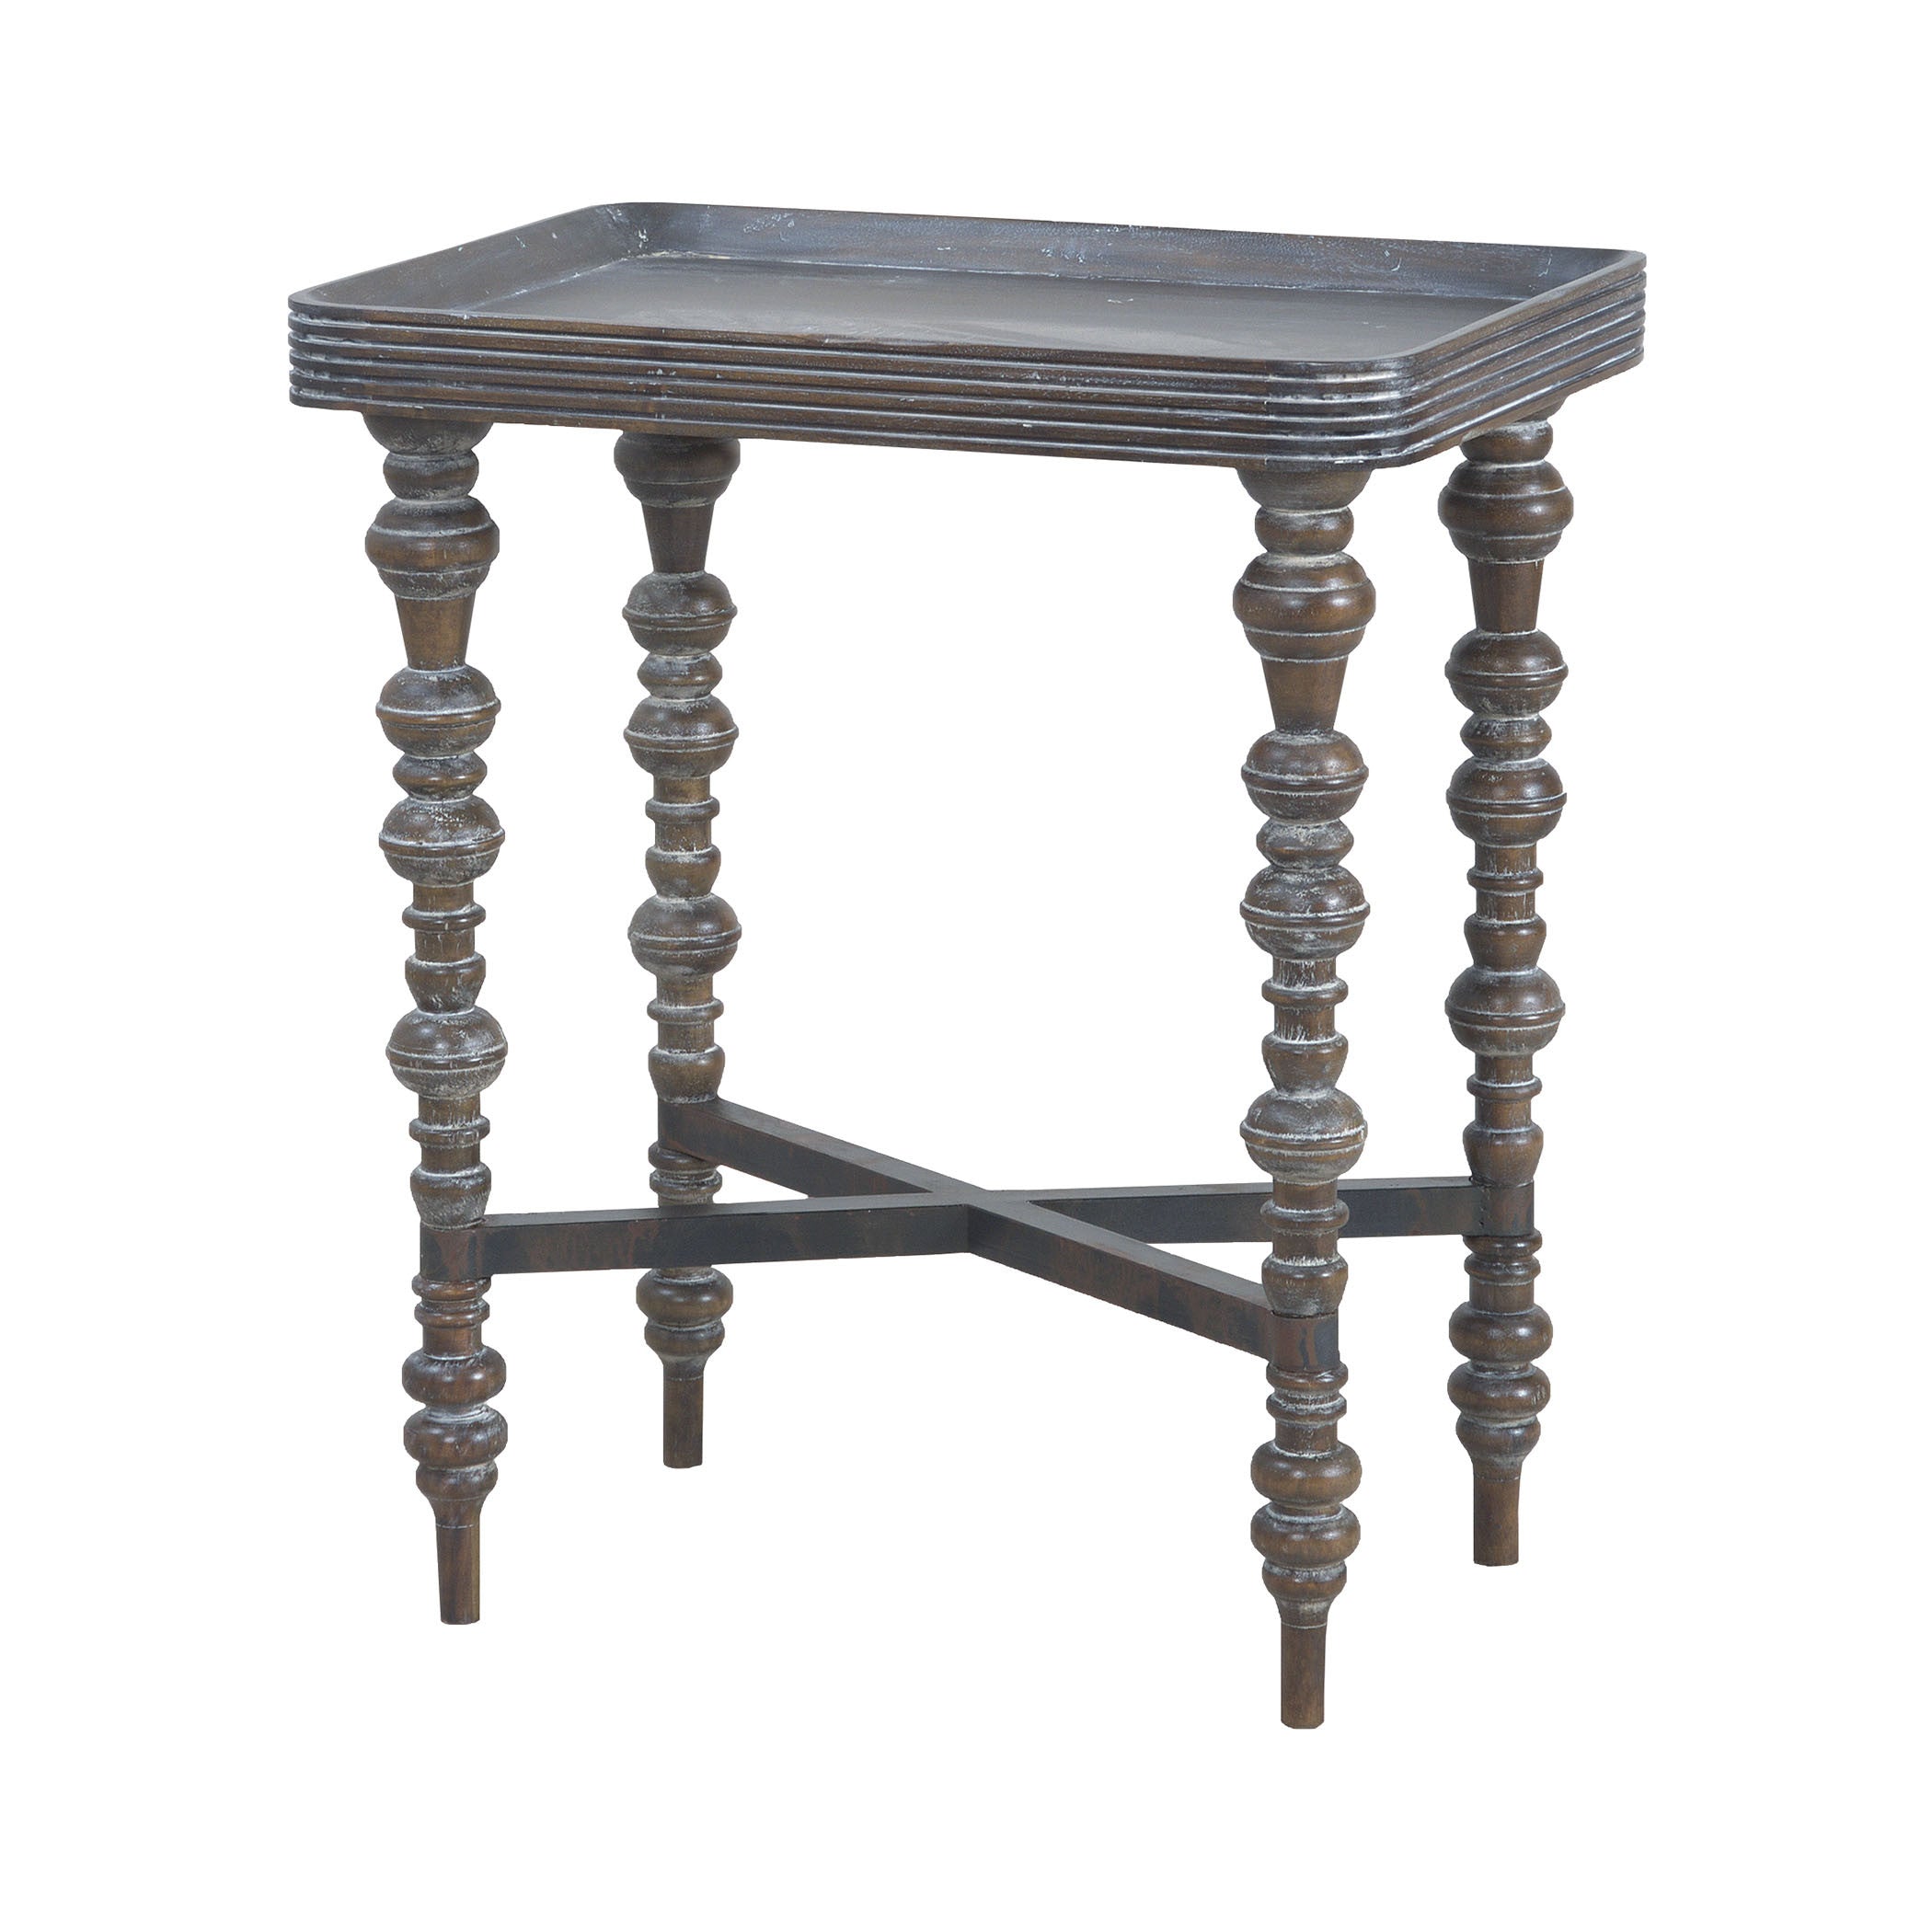 Guildmaster Gui-7115556 Heritage Collection Heritage Grey Stain Finish Table